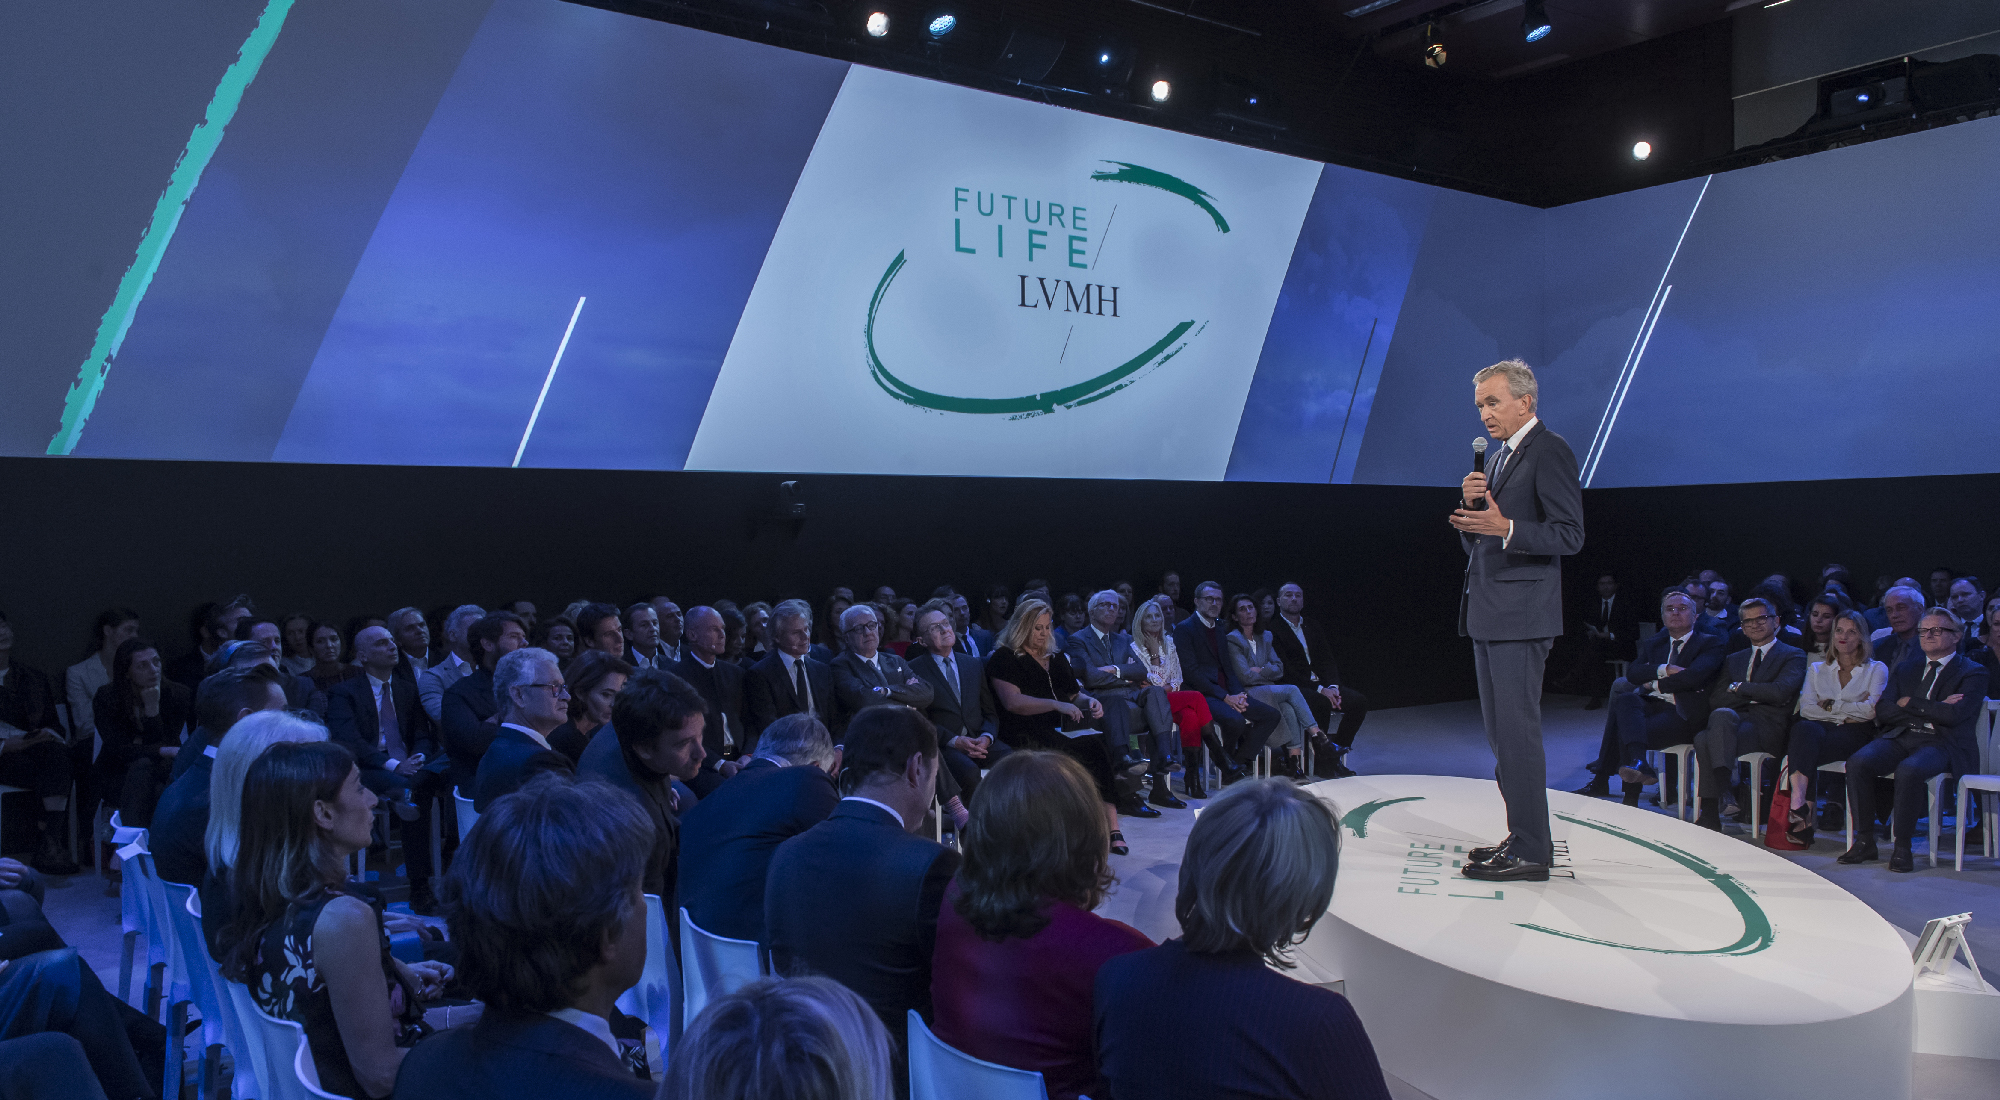 A year of commitment to society and the environment for LVMH and